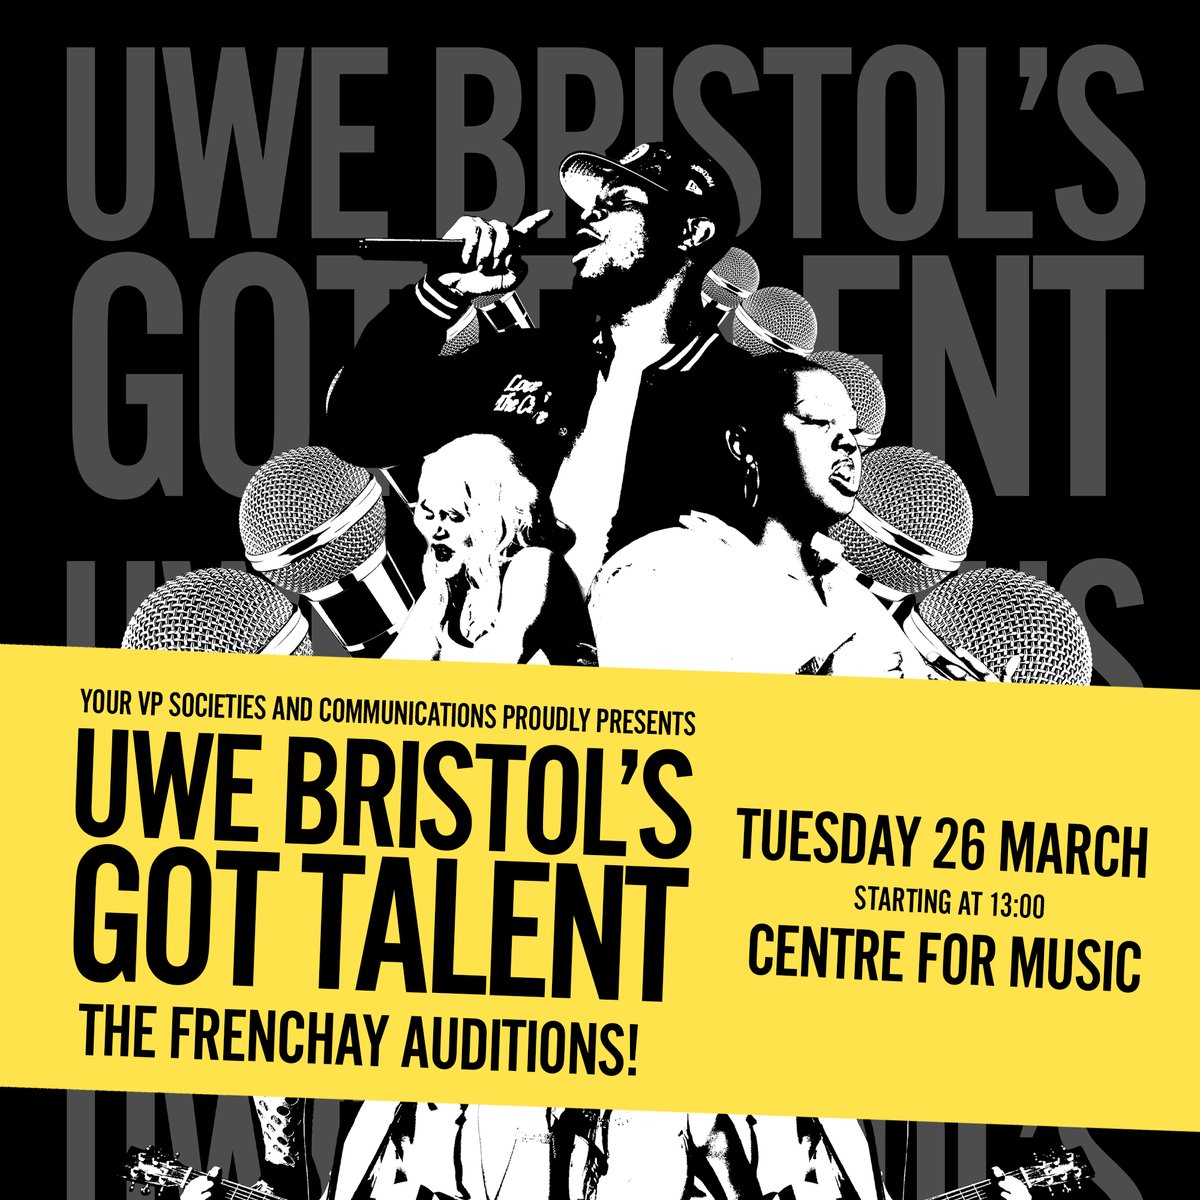 🎵🎼Get ready to showcase your talents at UWE Bristol's Got Talent! Join us on Tuesday 26 March at 13:00 at the Centre for Music. Don't miss your chance to shine!